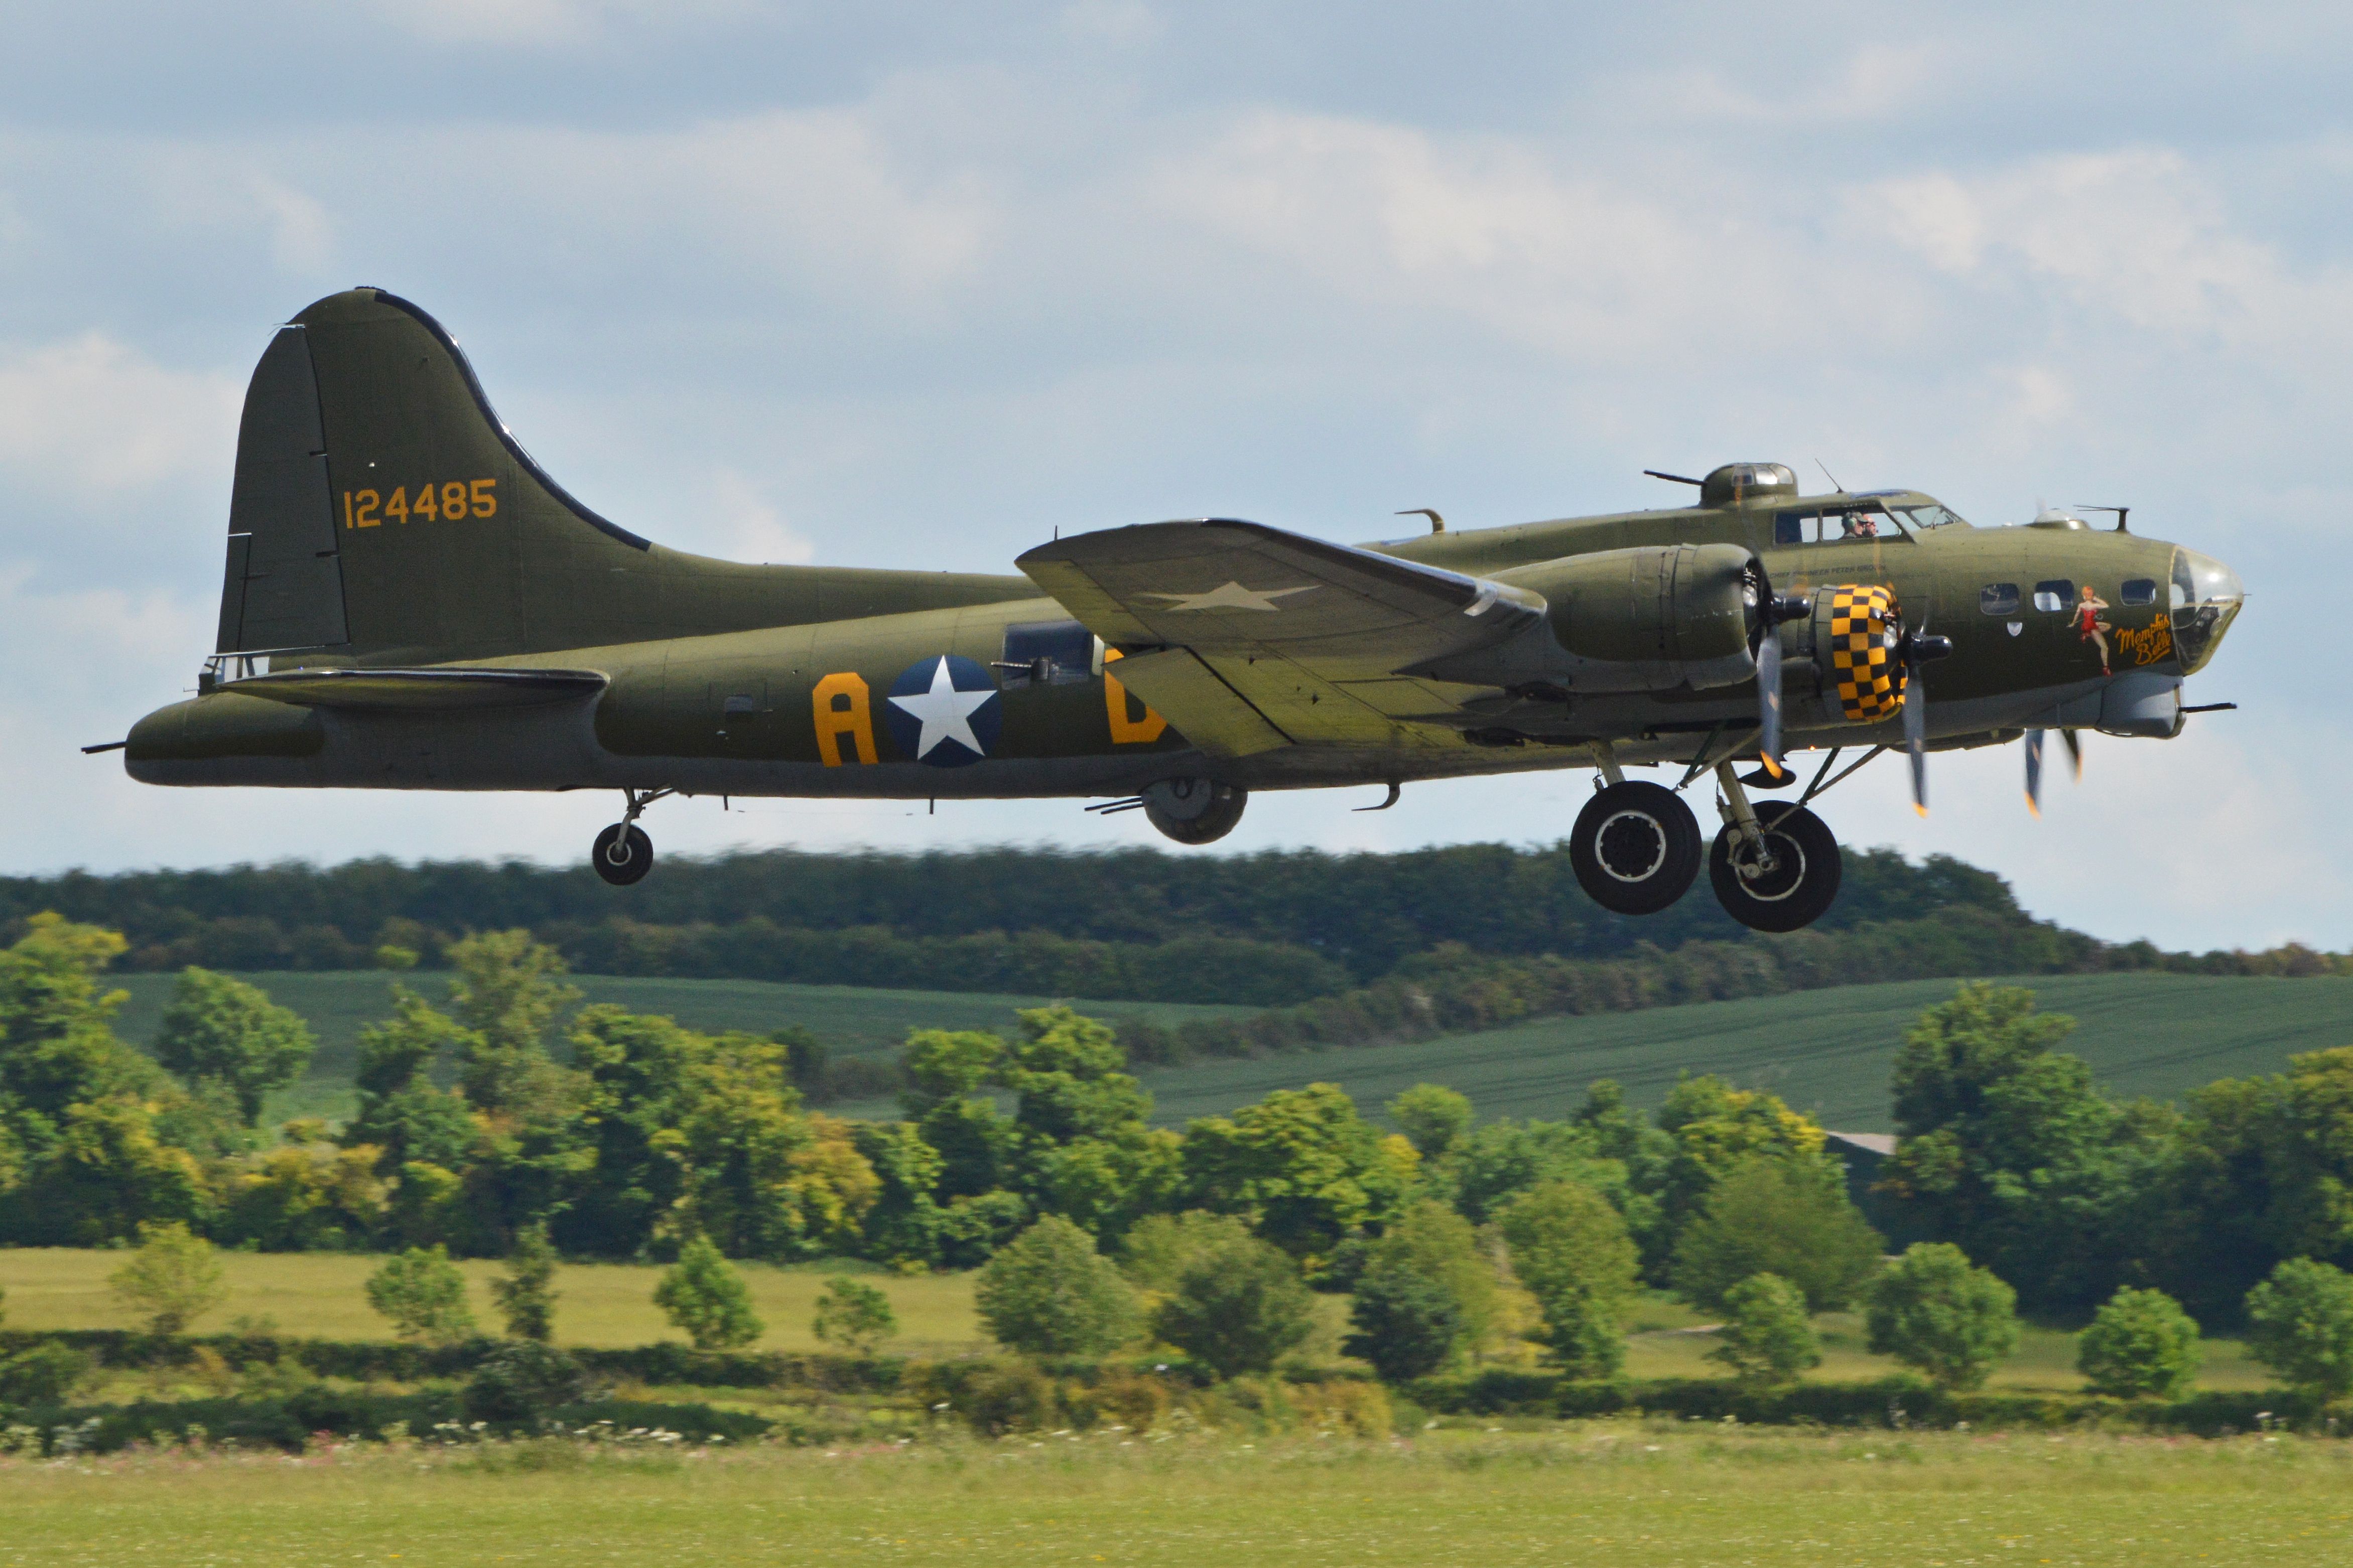 A B-17 flying fortress flying close to the ground.